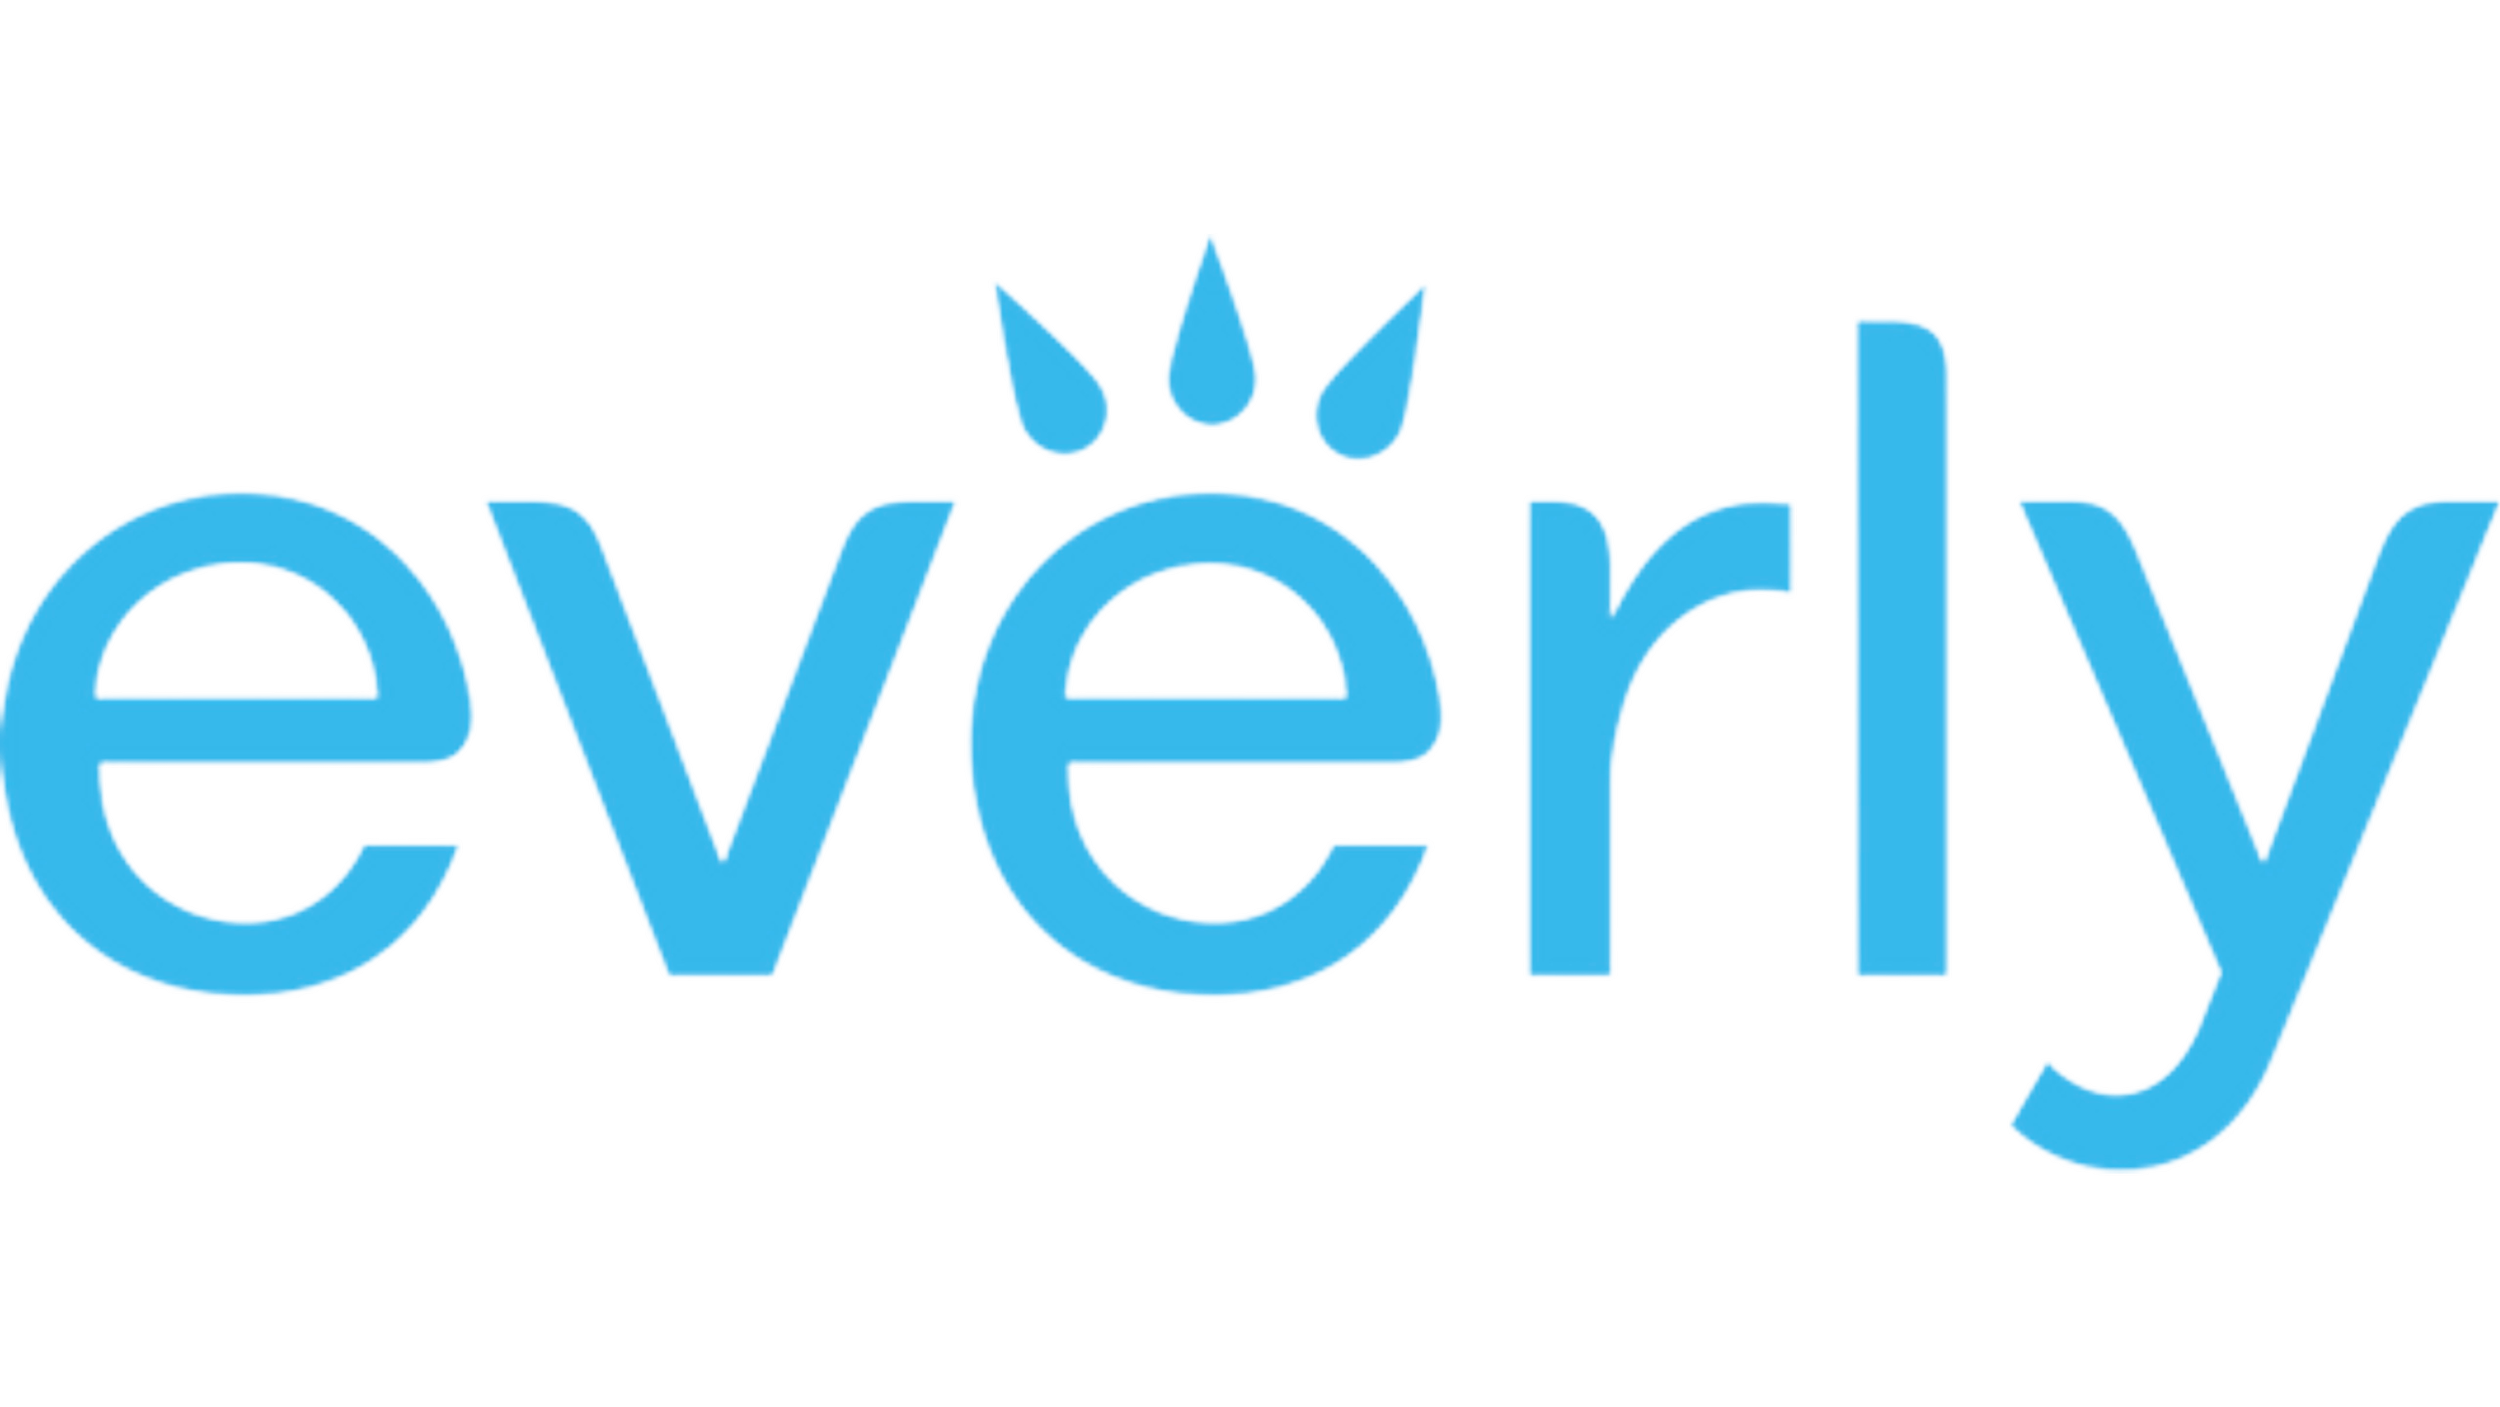 everly logo (1).png